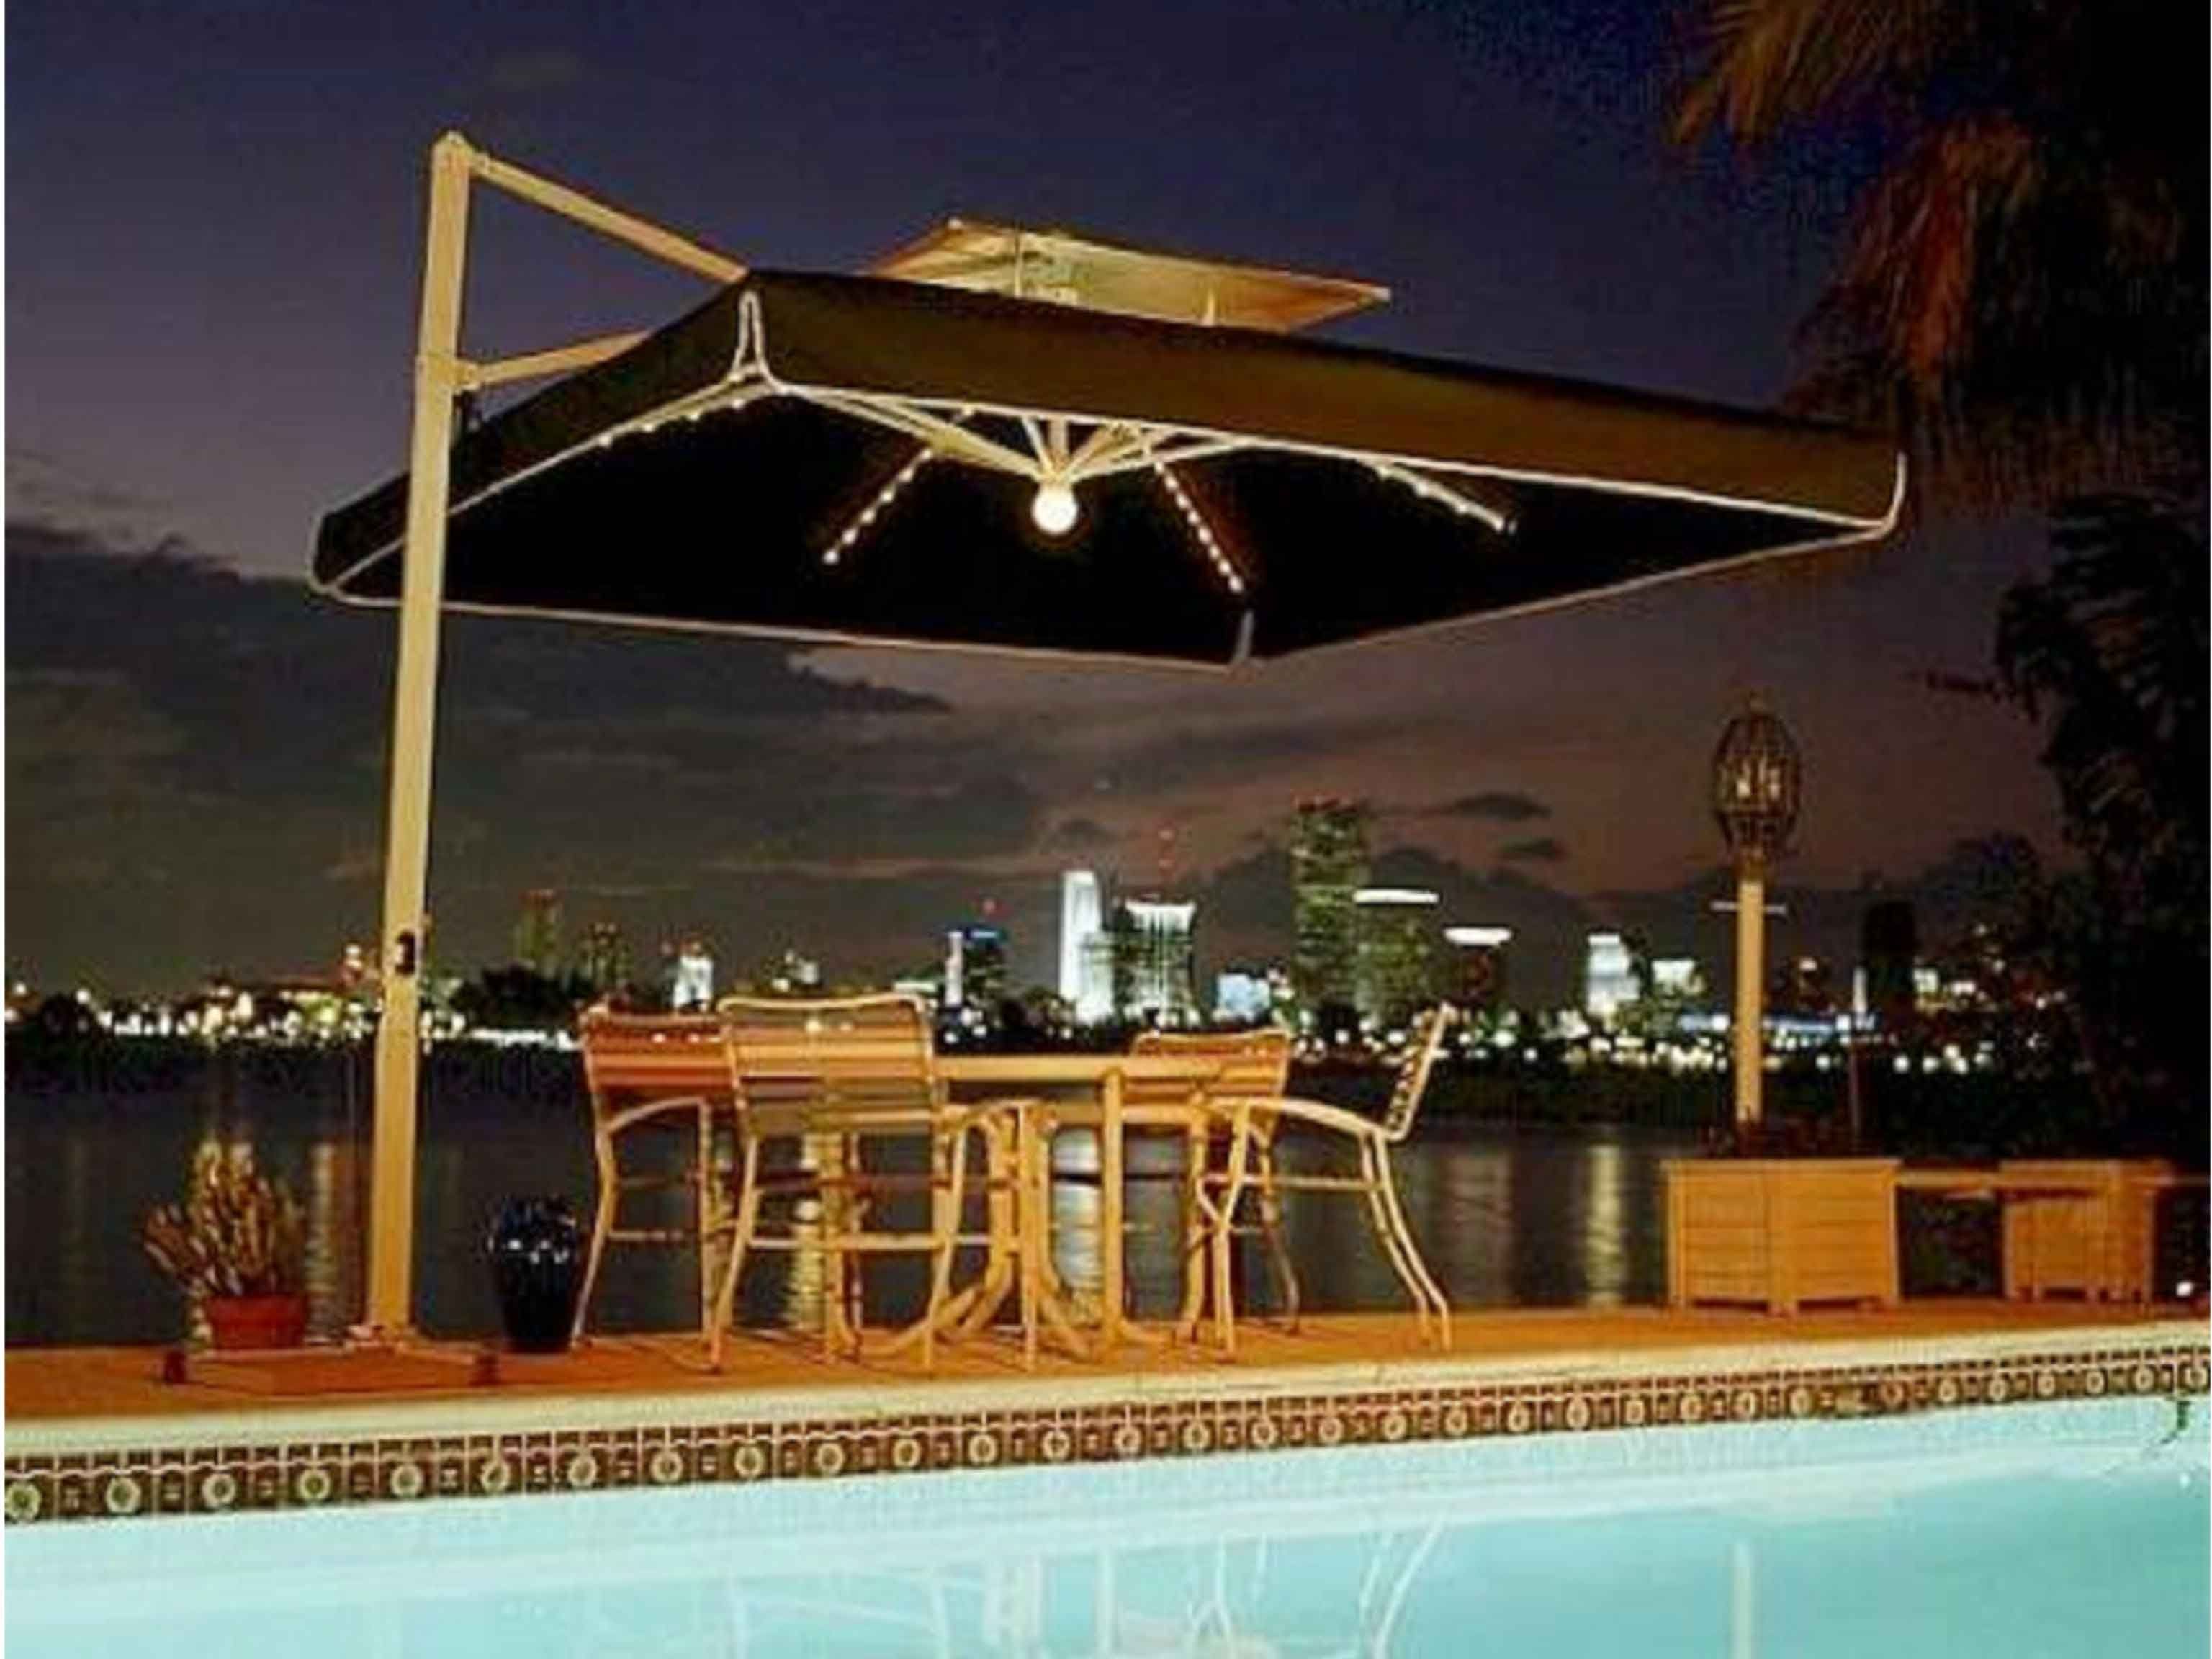 Extended Patio Umbrellas For Well Known Extended Patio Ideas Beautiful Huge Umbrellas For Patio Cantilever (View 5 of 20)